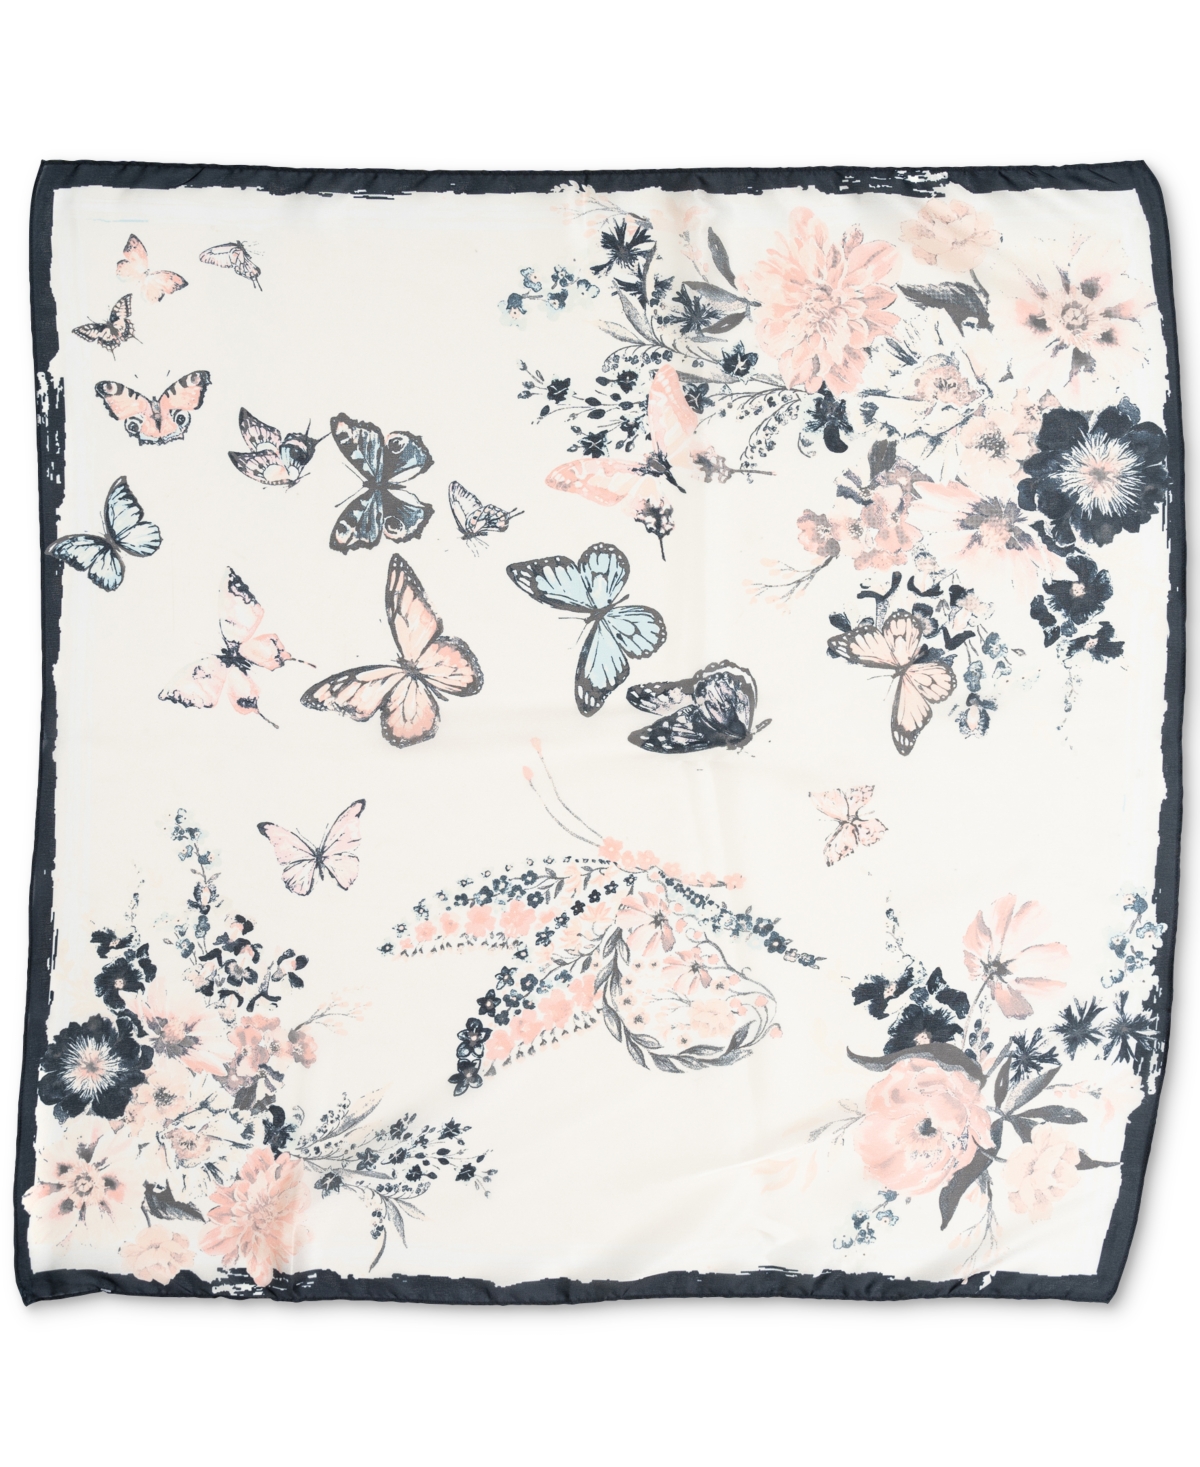 Inc International Concepts Butterfly Floral Bandana Square, Created for Macy's